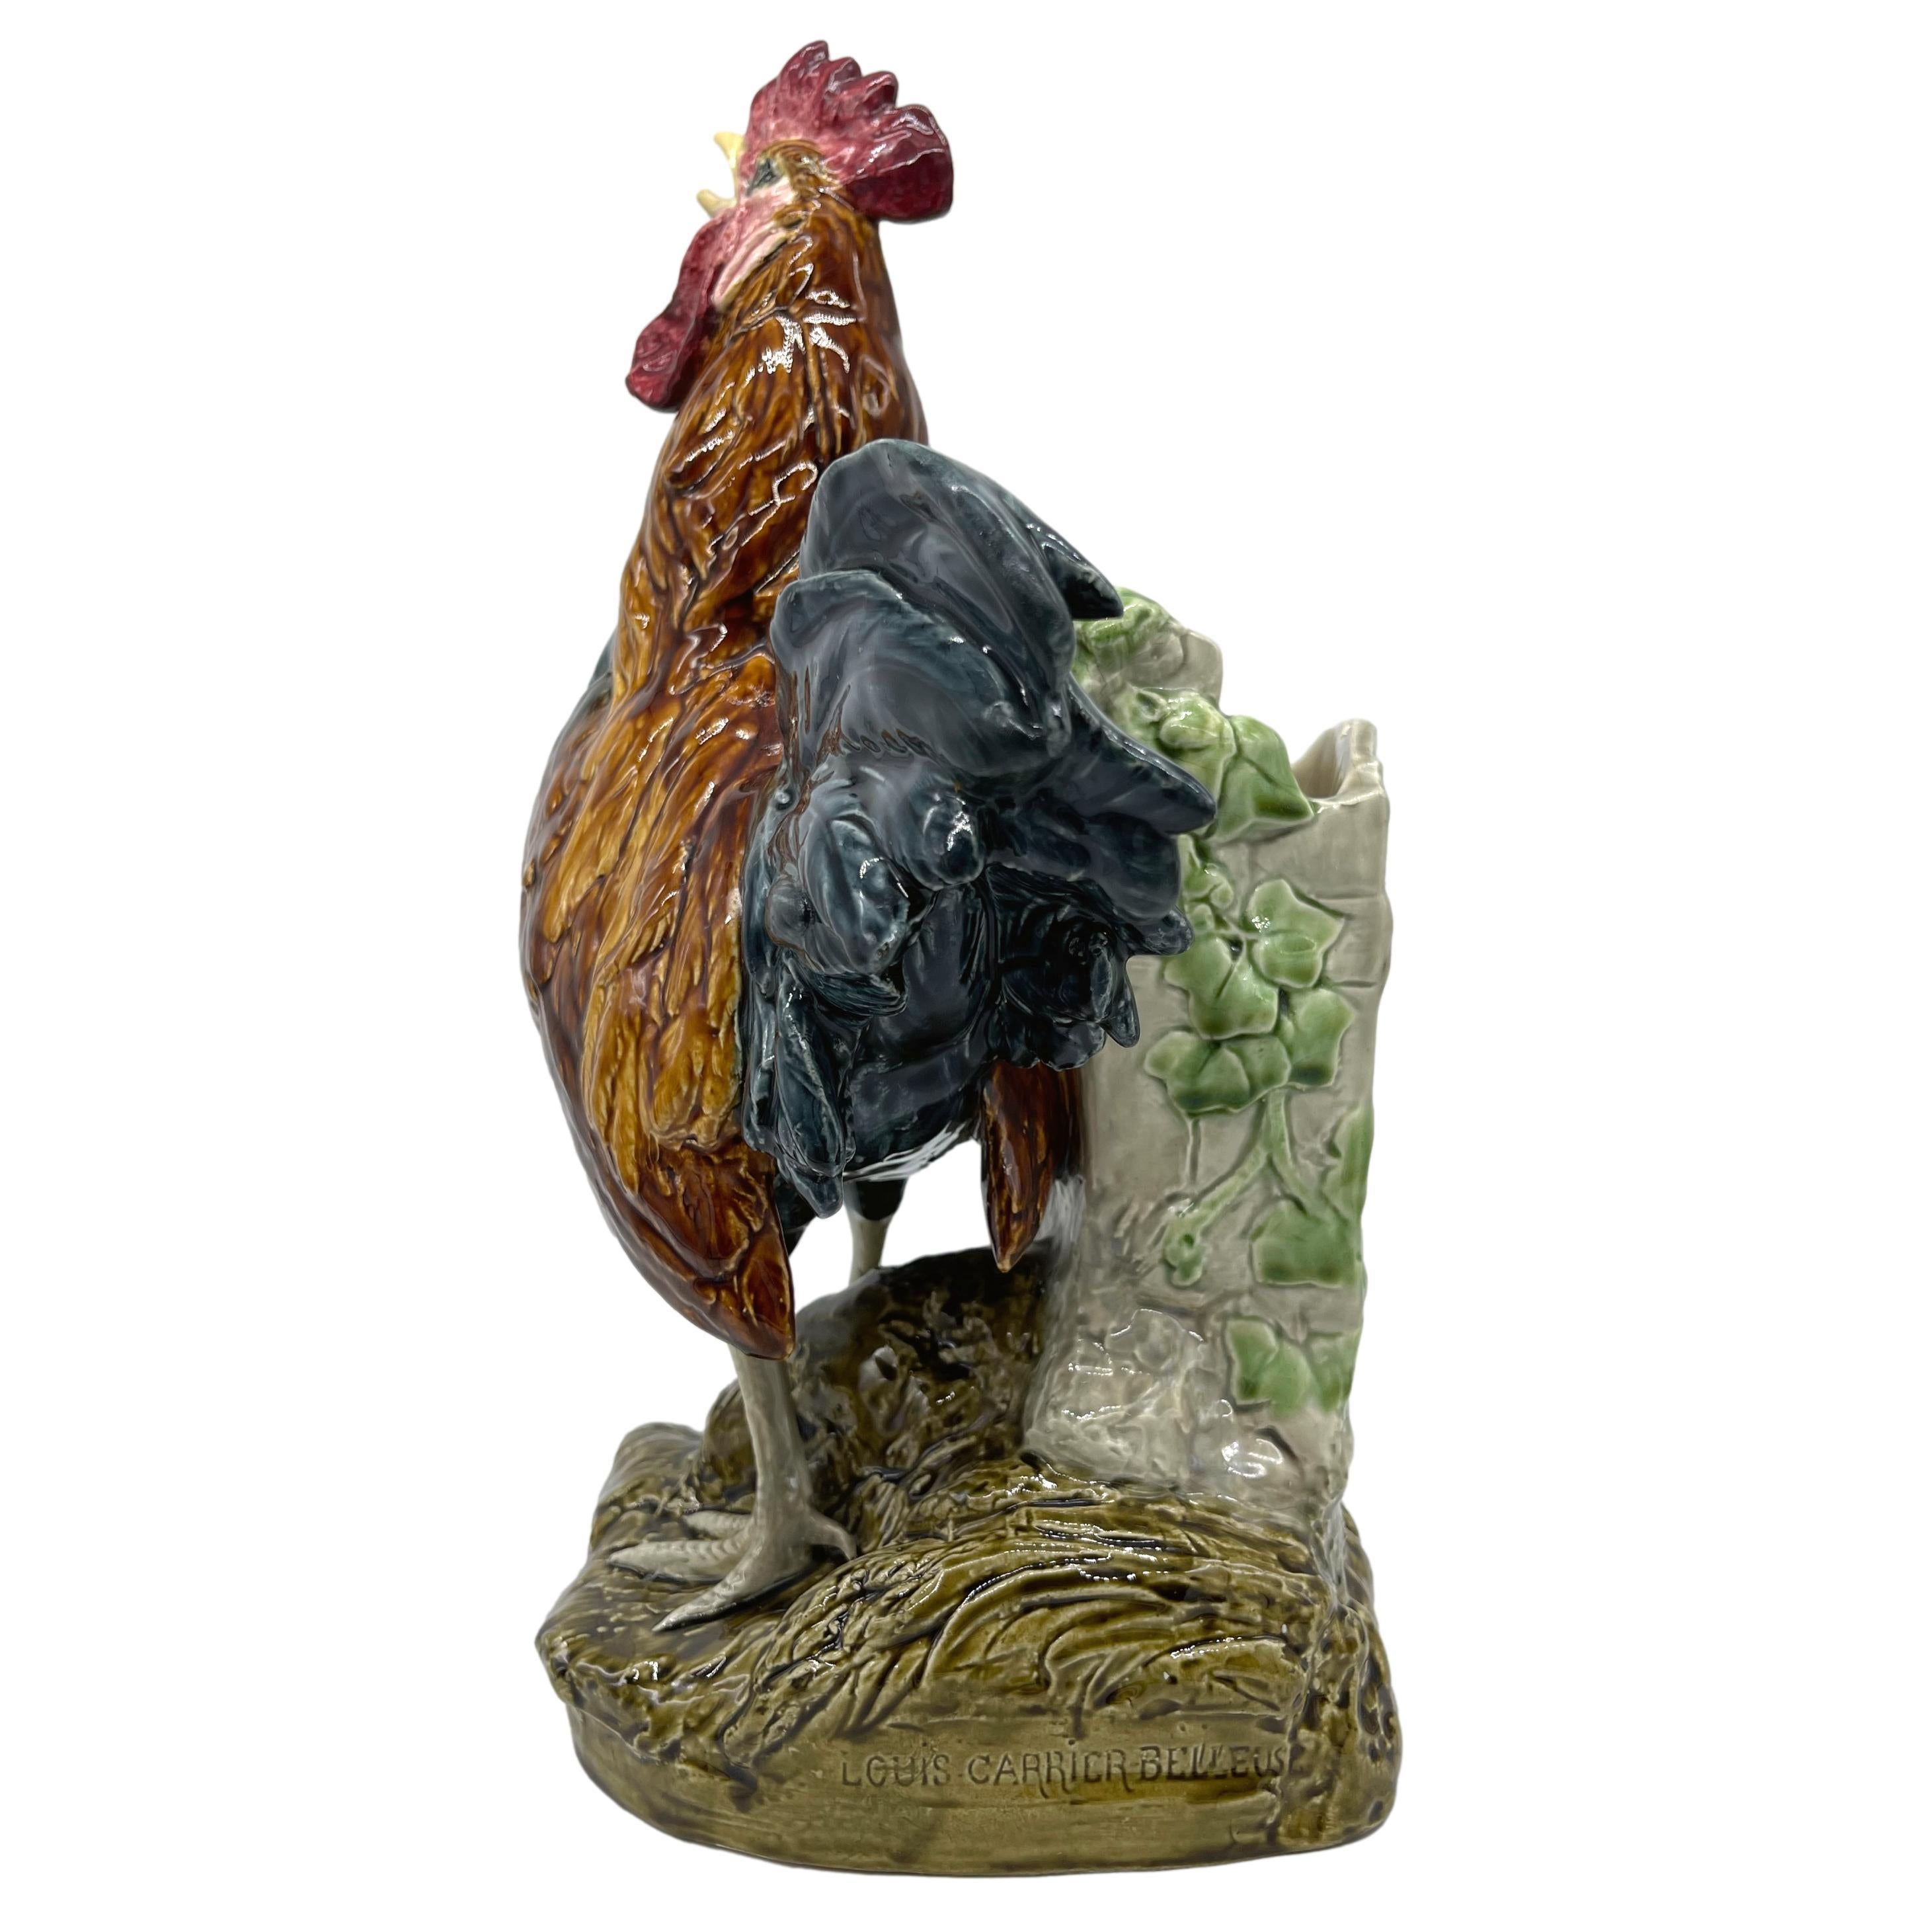 Majolica Rooster Large Spill Vase Signed Louis Carrier-Belleuse, French, ca 1890 For Sale 1